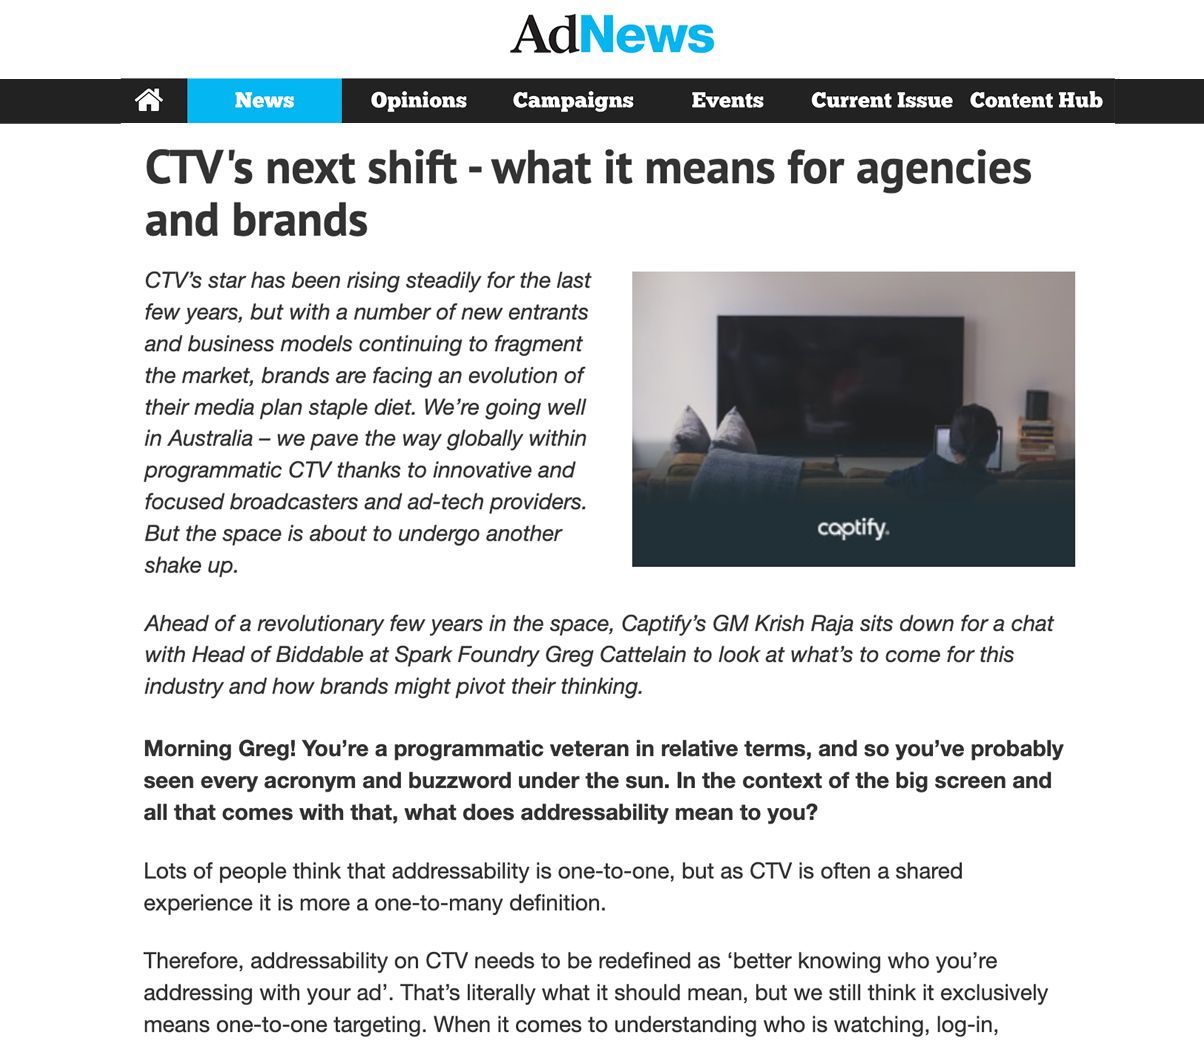 AdNews: CTV’s Next Shift – What It Means For Agencies And Brands